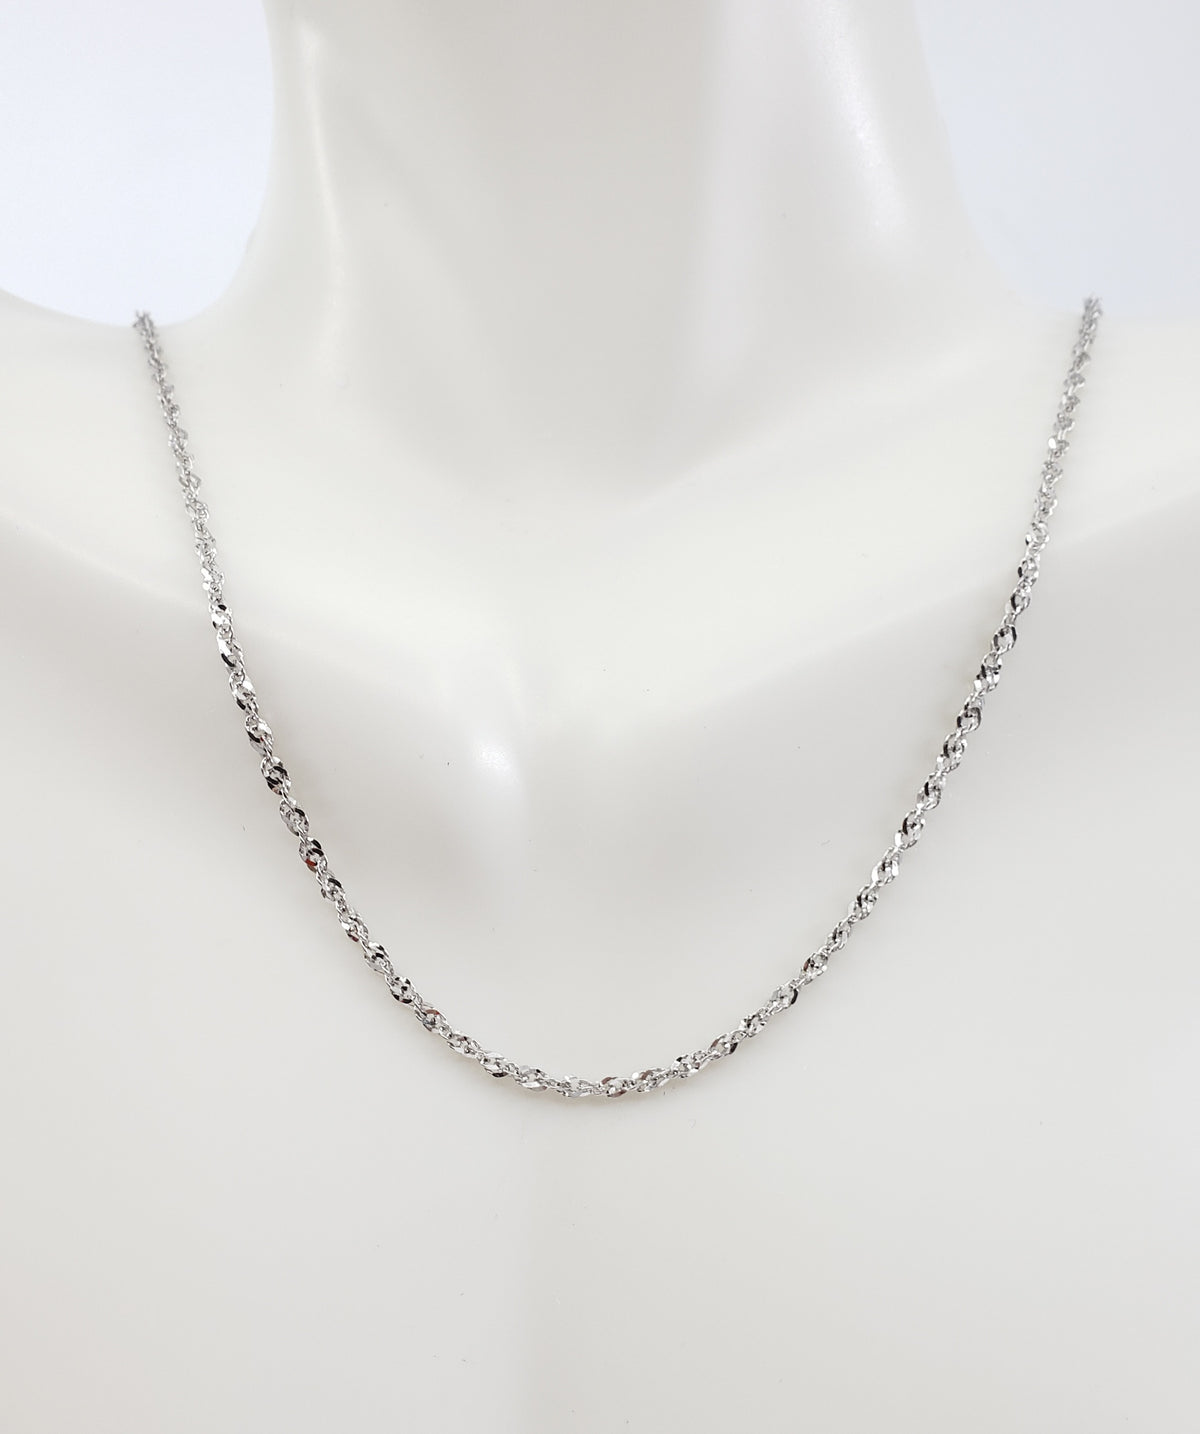 10K White Gold 0.70mm Singapore Chain - 20 Inches